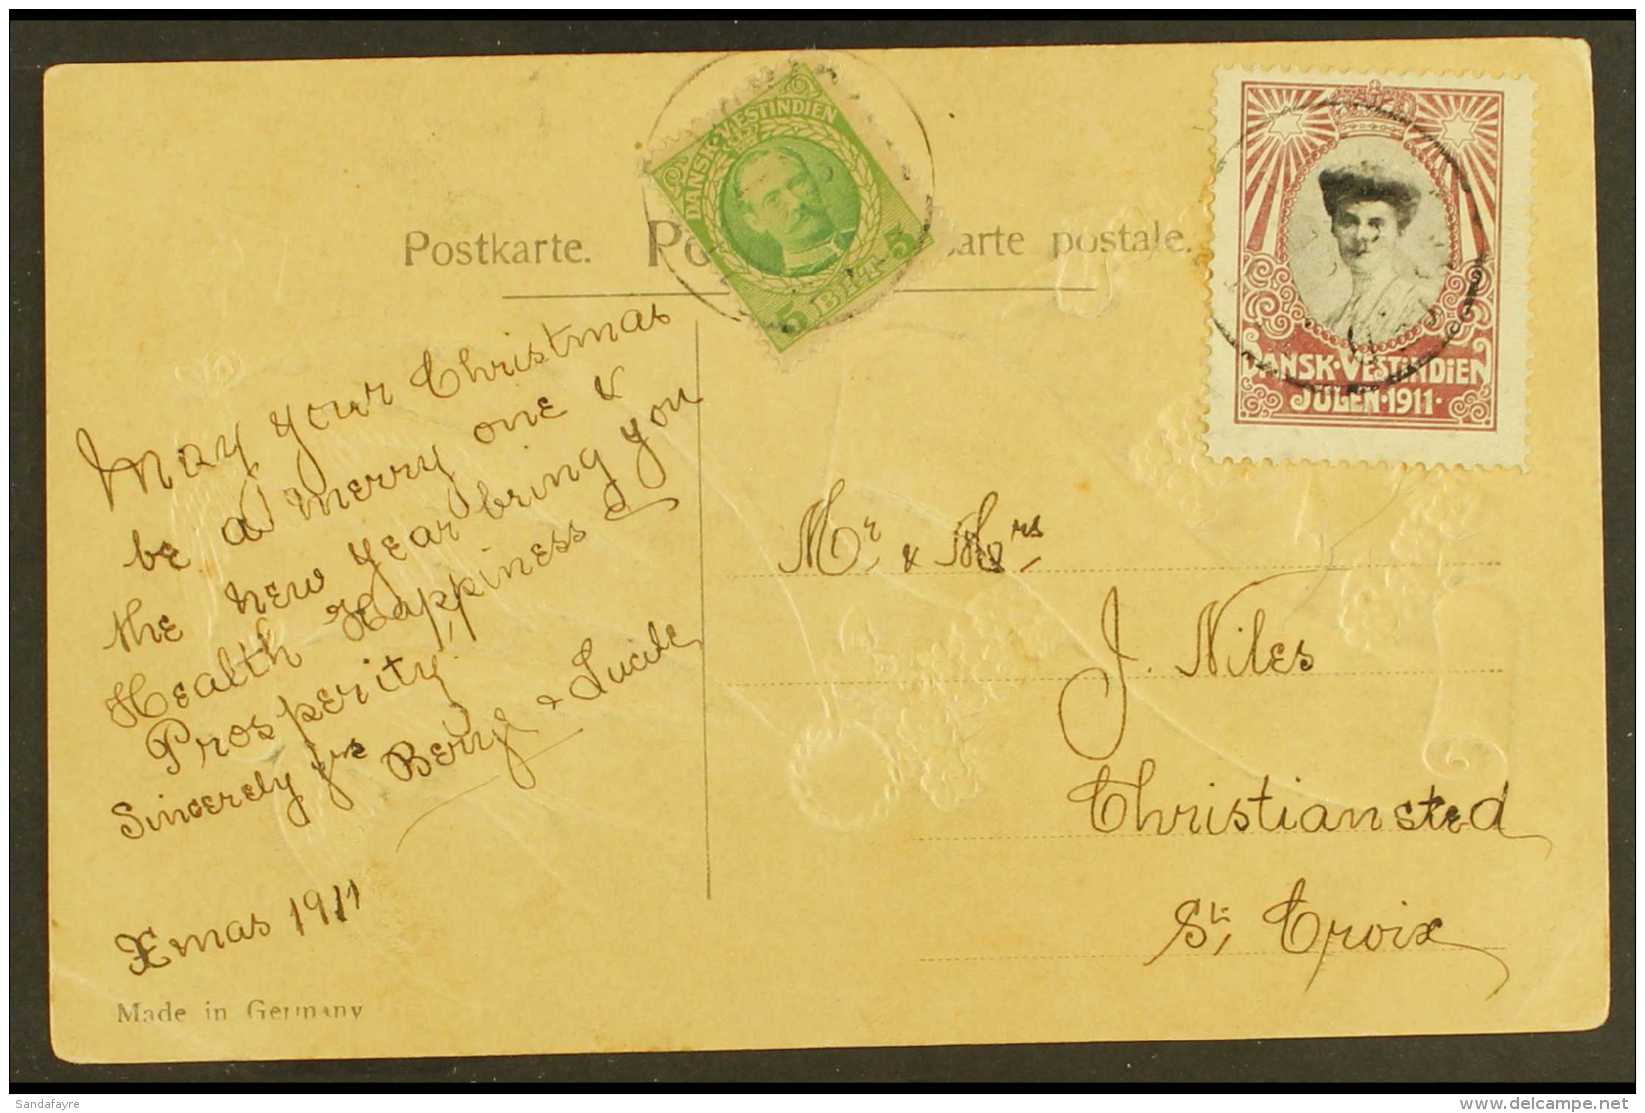 1911 CHRISTMAS SEAL USED ON POSTCARD 1911 Locally Addressed Embossed "Good Wishes" Postcard Bearing 5b Green... - Danish West Indies